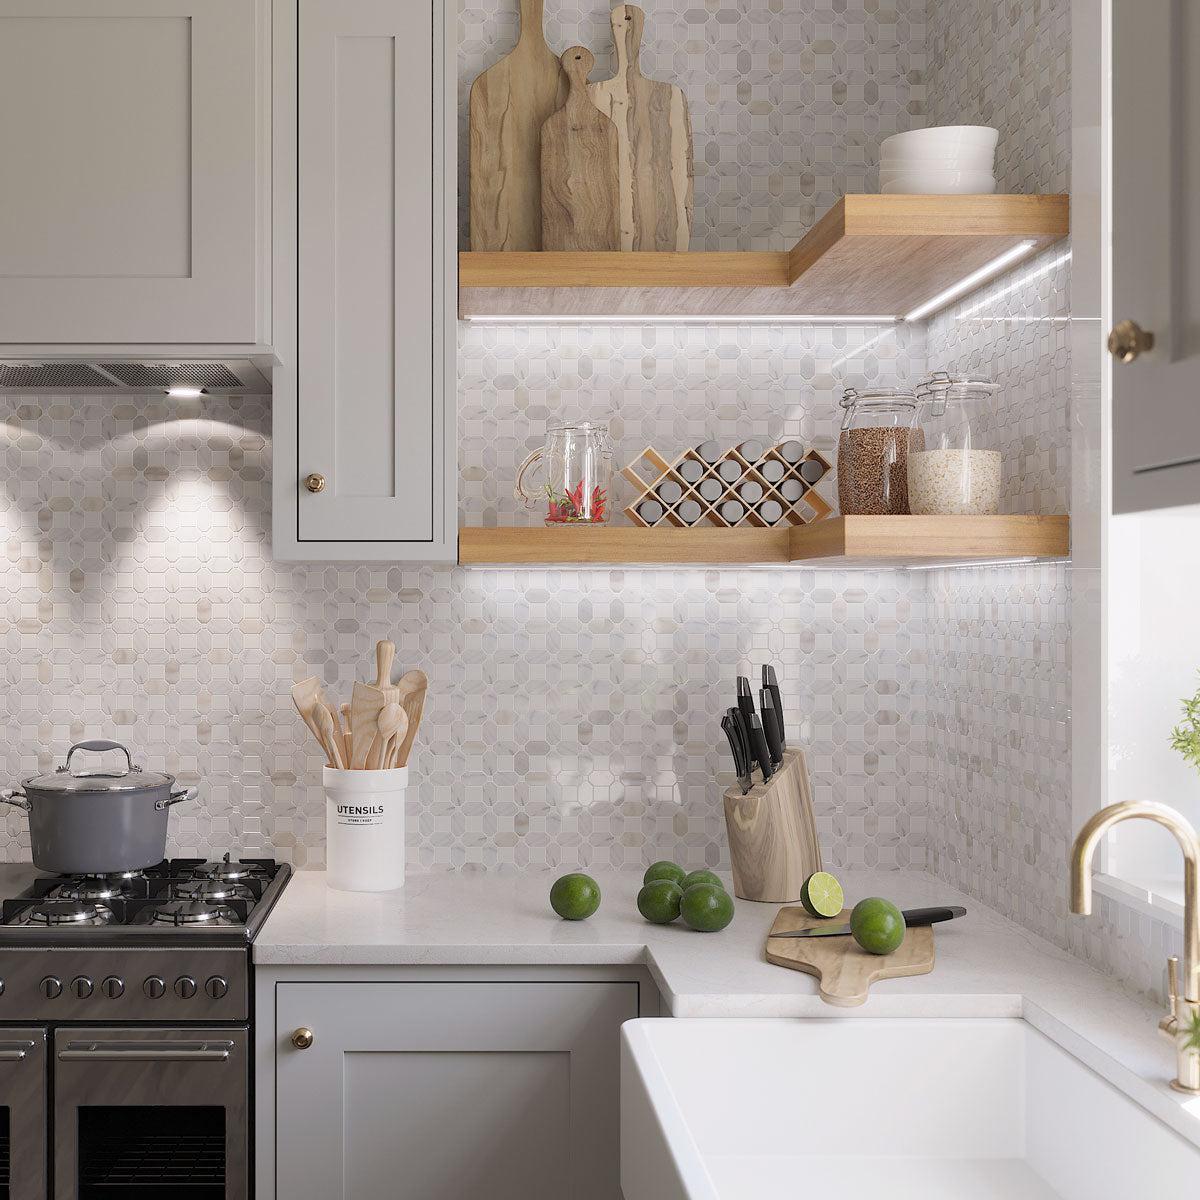 Calacatta Gold Marble Mosaic tile backsplash with open shelves and neutral cabinet paint